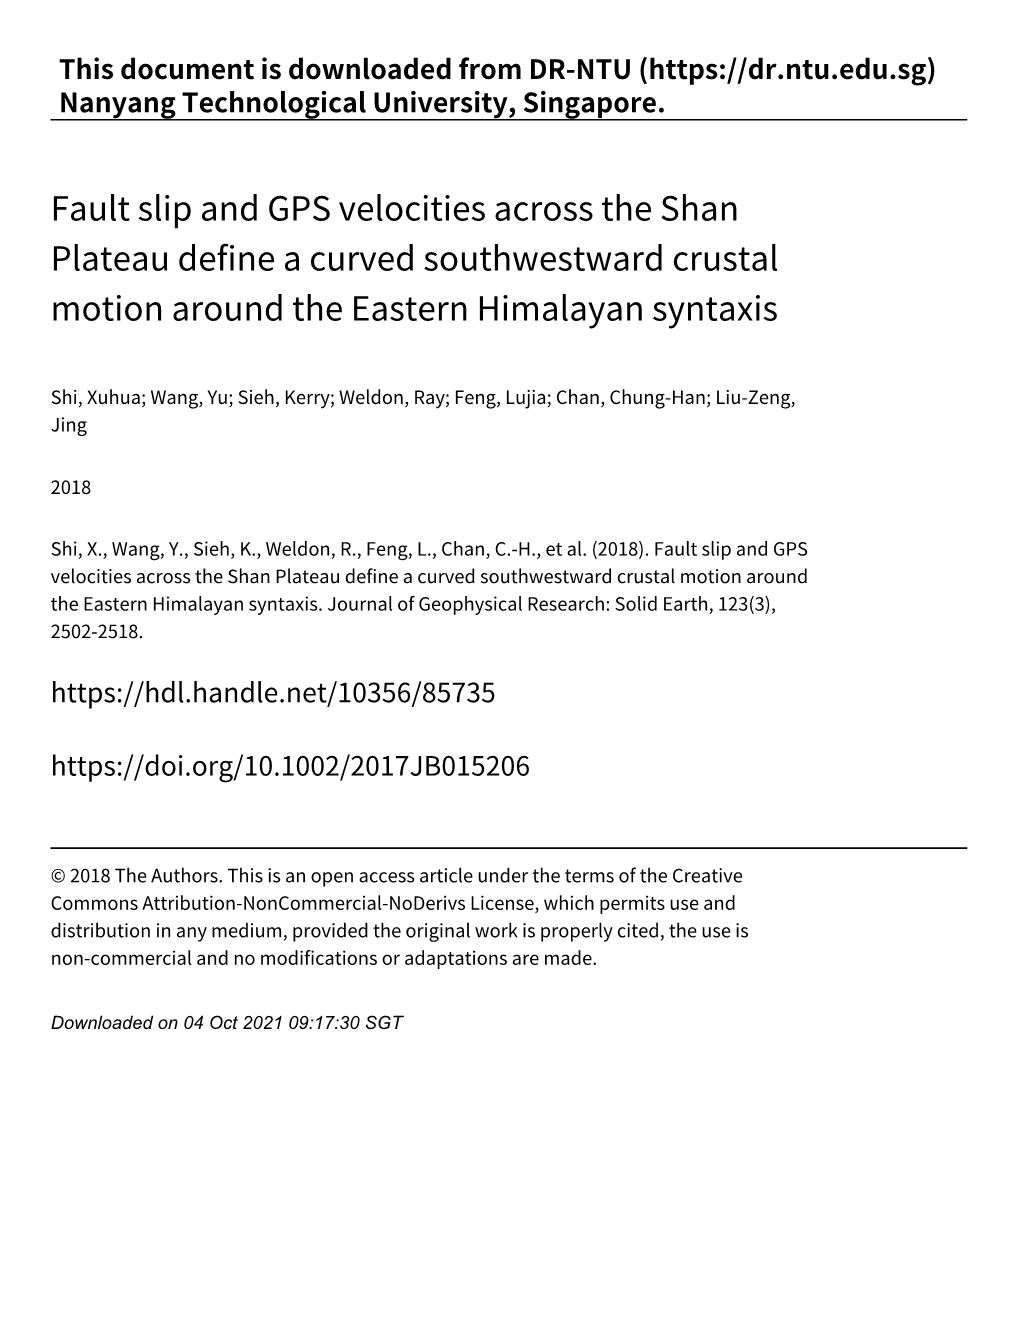 Fault Slip and GPS Velocities Across the Shan Plateau Define a Curved Southwestward Crustal Motion Around the Eastern Himalayan Syntaxis